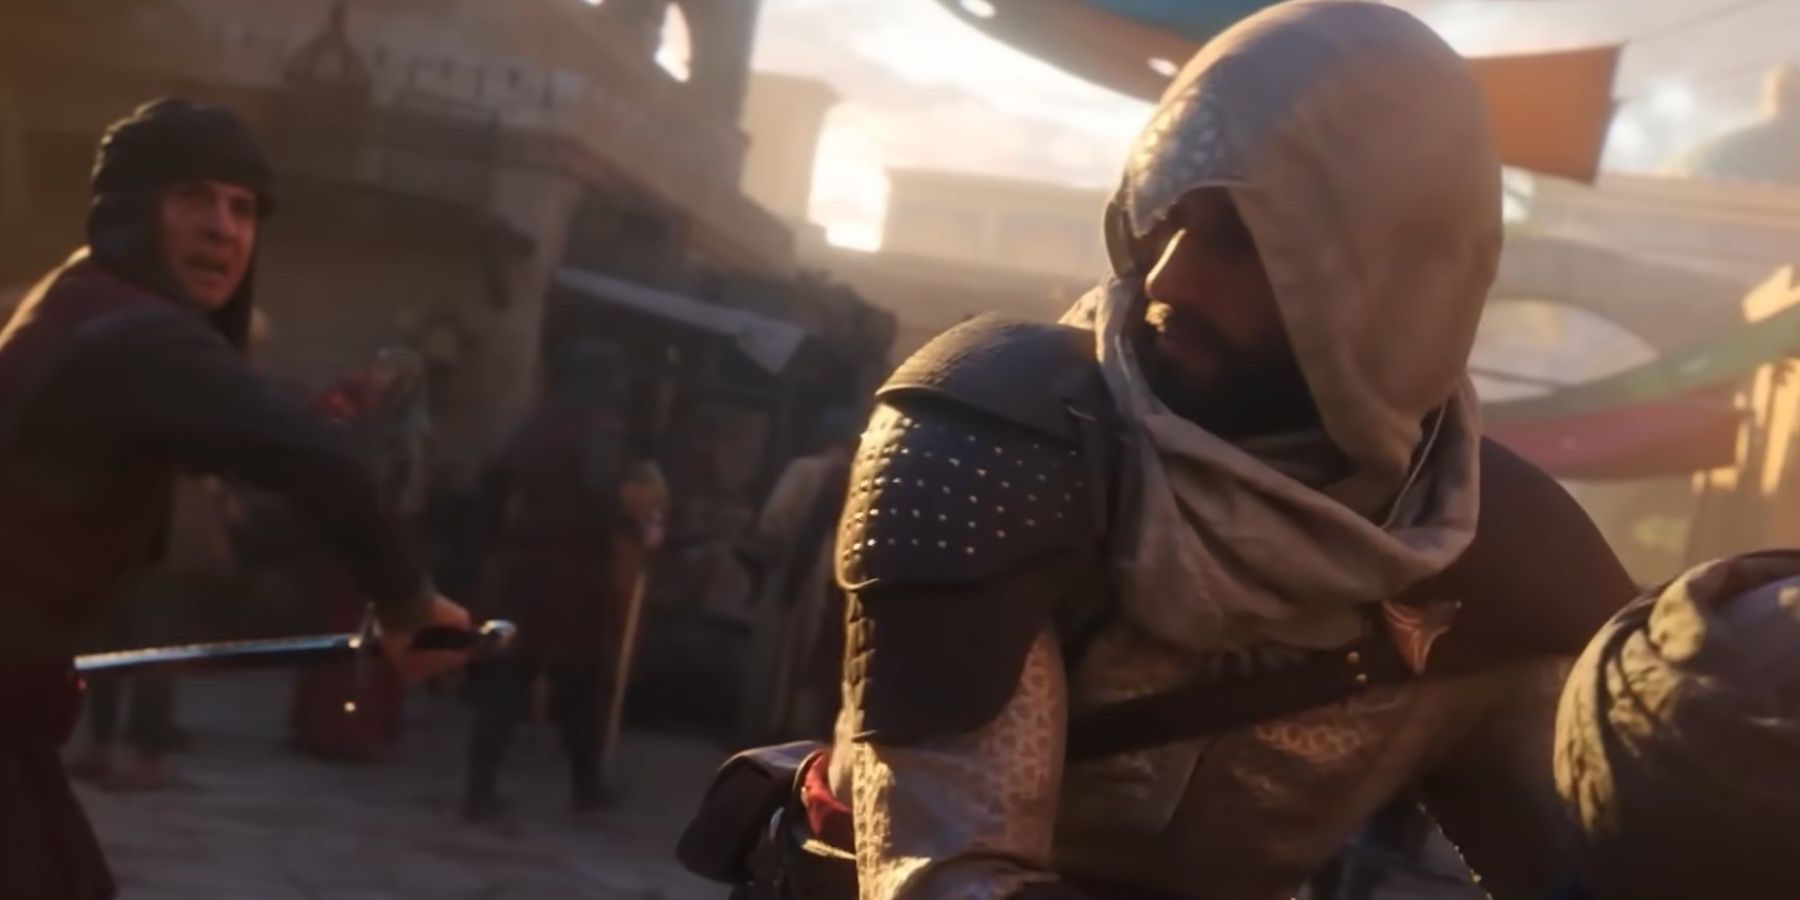 Assassin's Creed Mirage Opening Gameplay Leaked Online - Insider